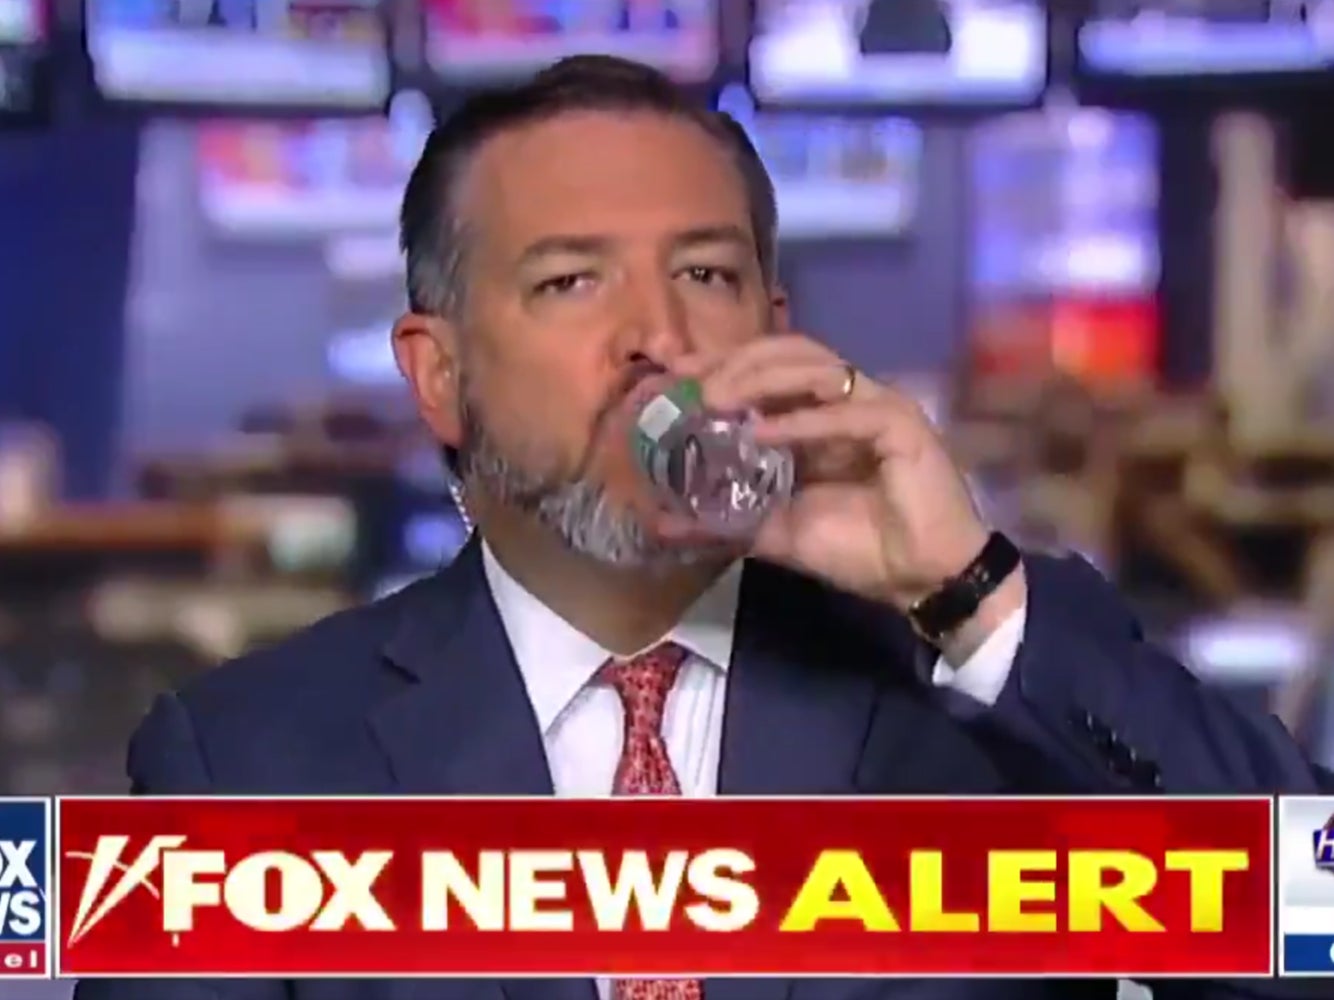 Fake video from 2019 shows Texas senator swallowing a fly live on Fox News